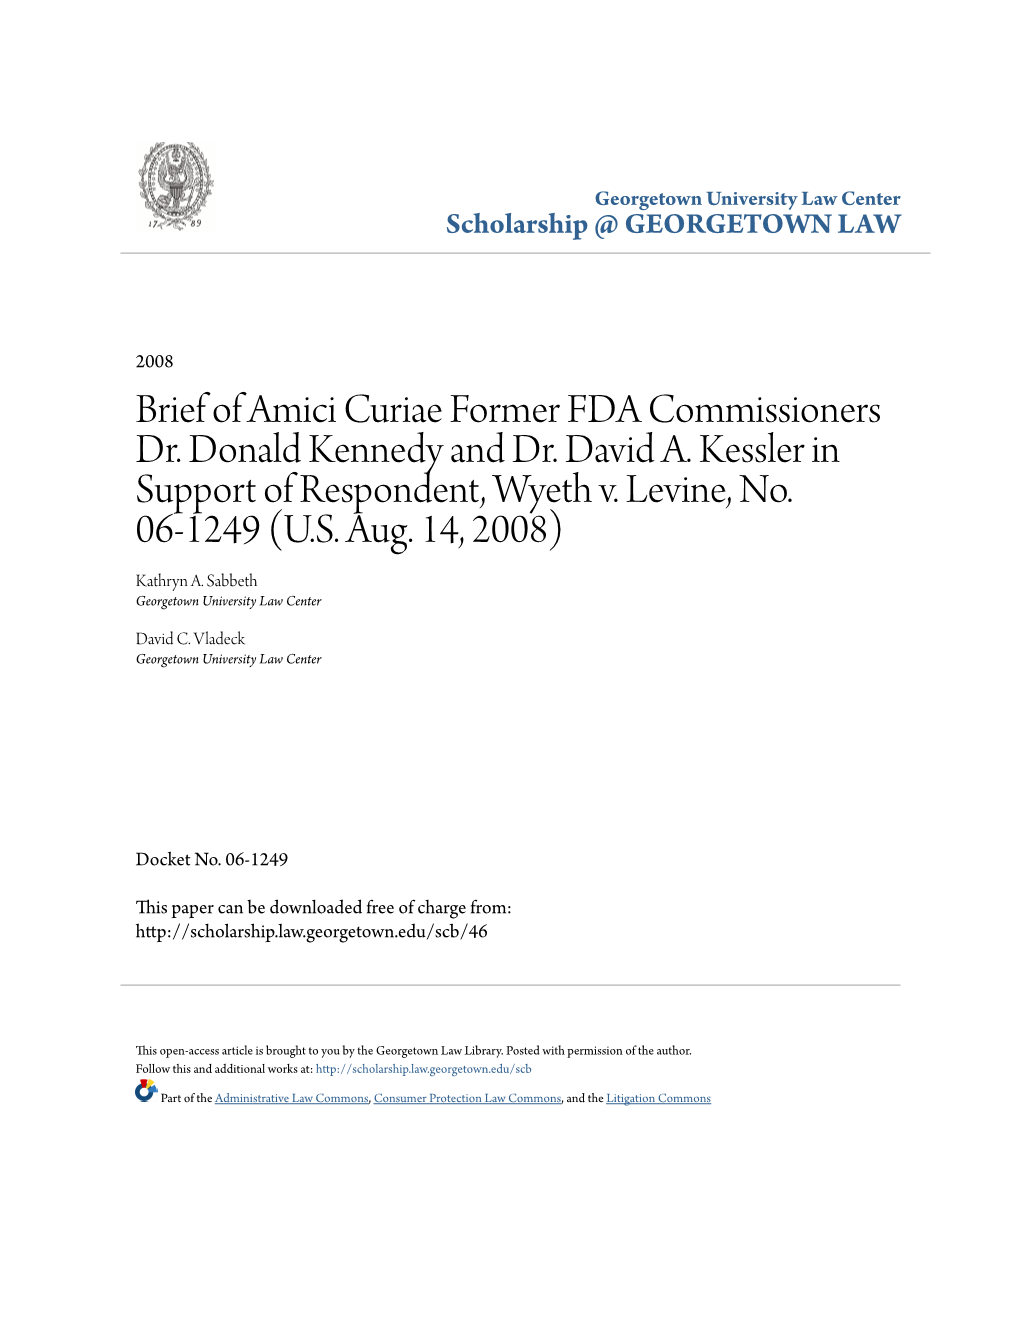 Brief of Amici Curiae Former FDA Commissioners Dr. Donald Kennedy and Dr